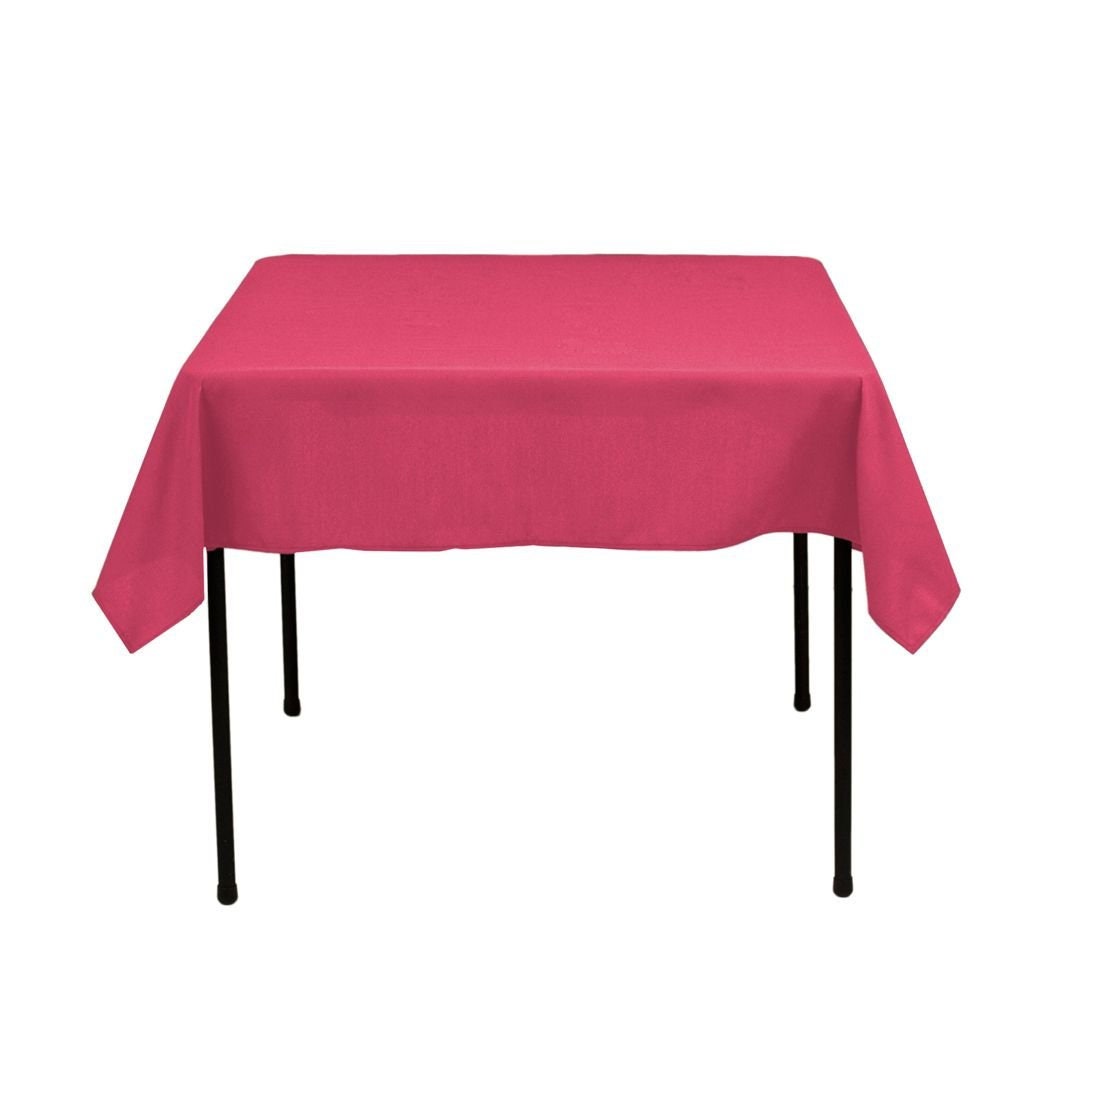 54 x 54-Inch Seamless Fuchsia Rectangular Polyester Tablecloth for Wedding Party Decorations Square Table Cloth Cover